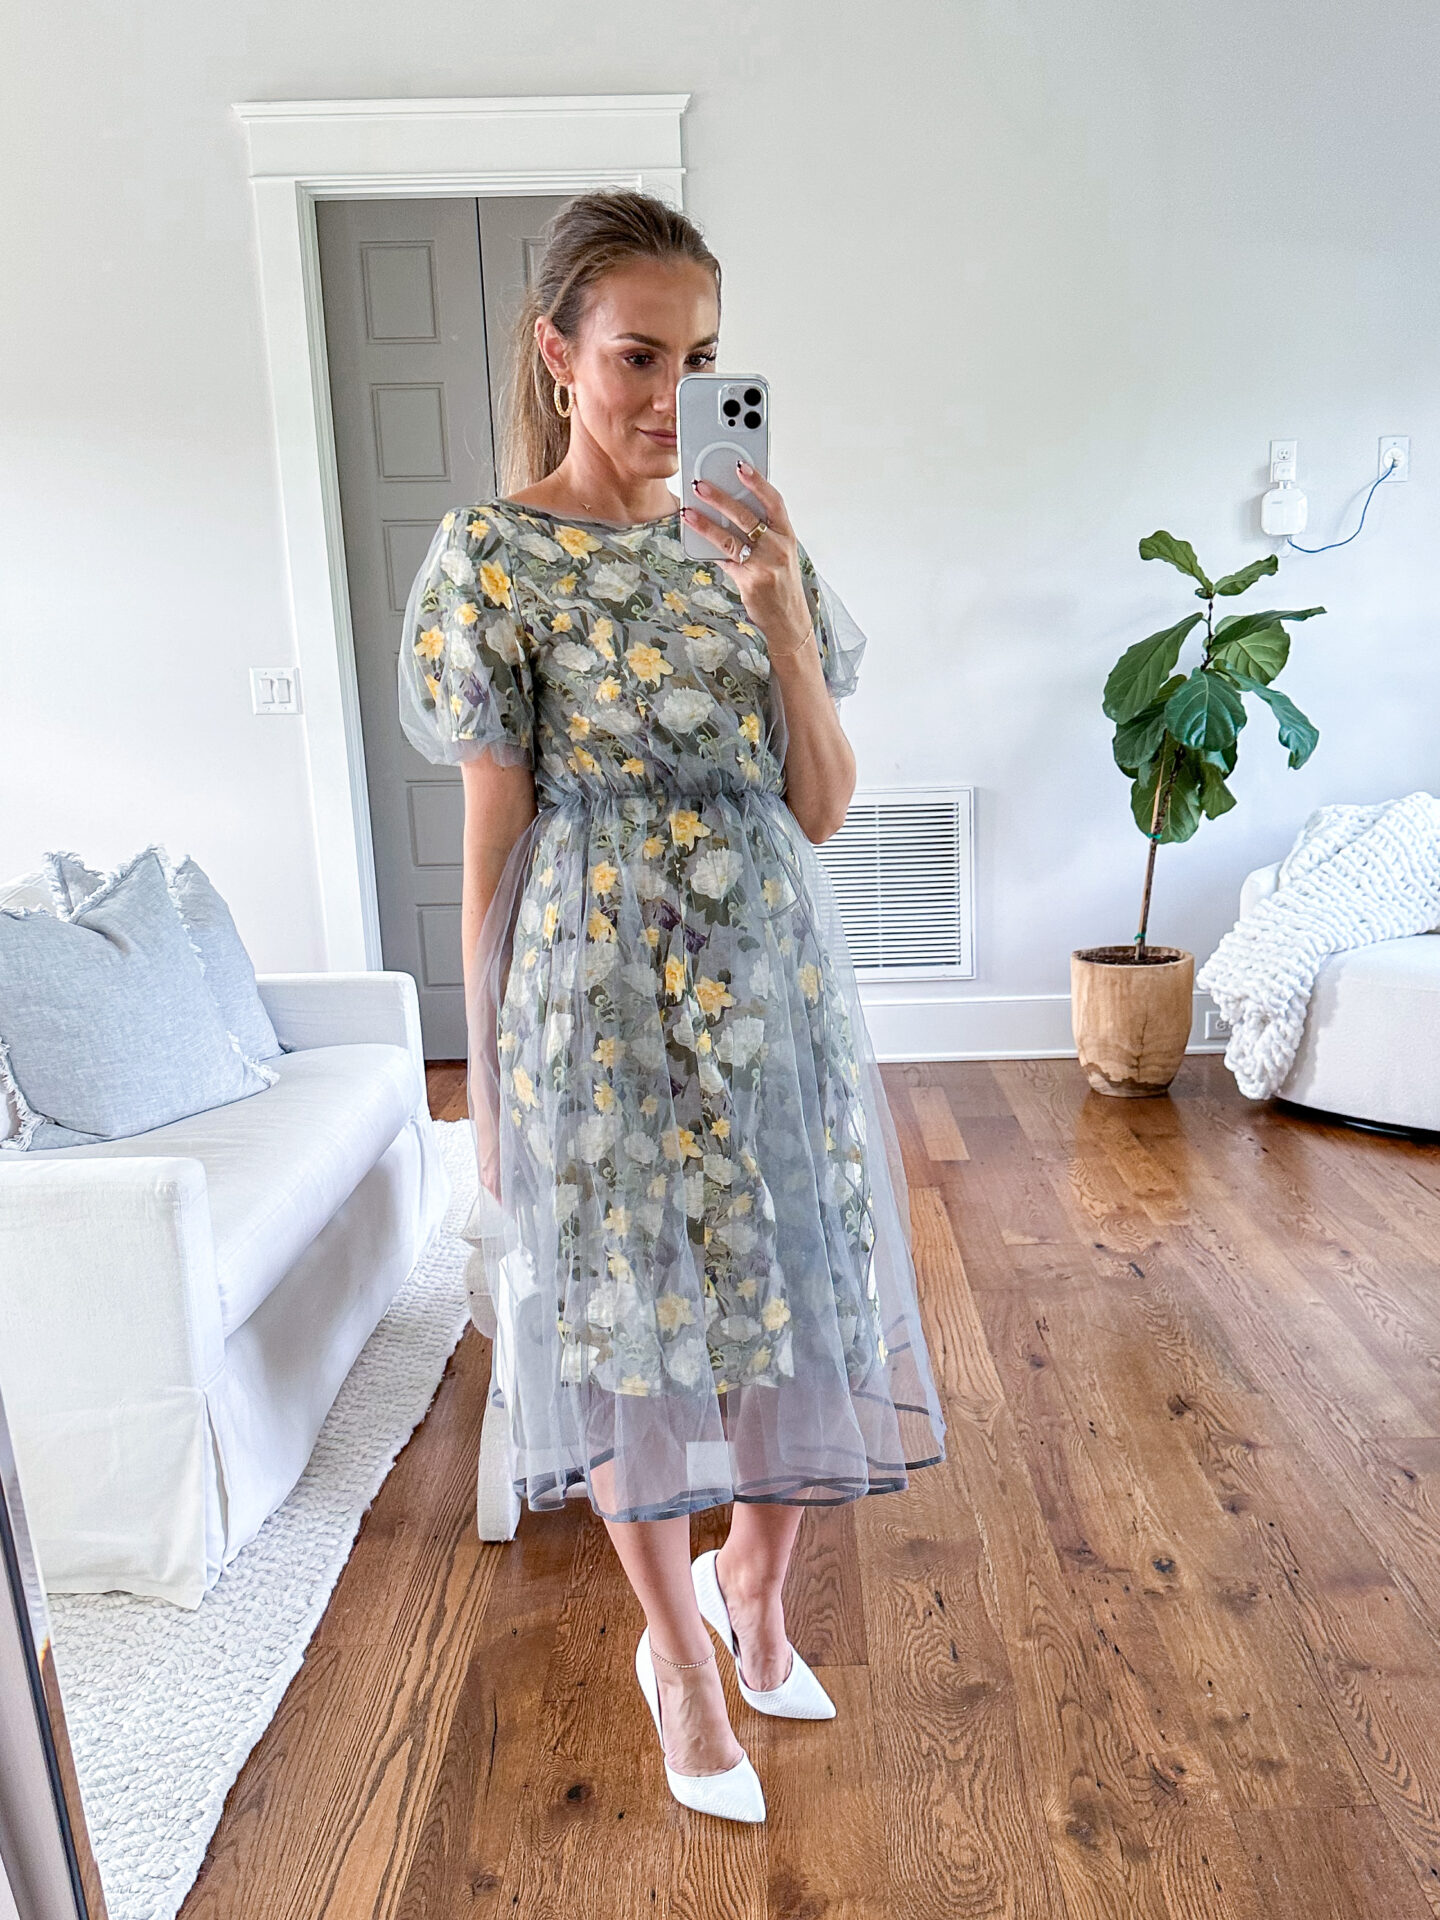 S. Deer floral A-line linen dress styled by fashion blogger Angela Lanter